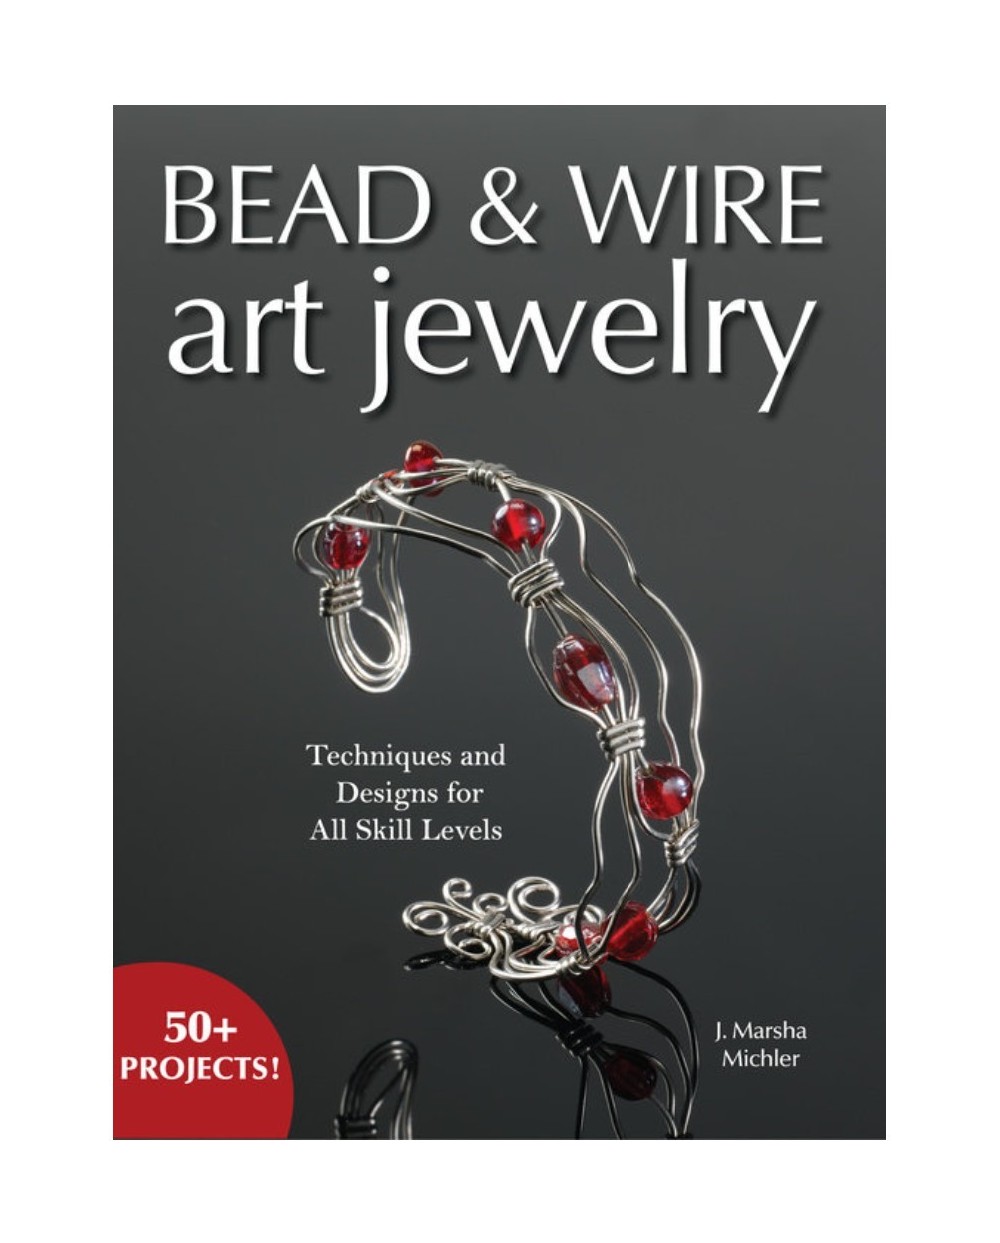 Knyga "Bead & Wire Art Jewelry: Techniques & Designs for all Skill", 2006, 128 psl.